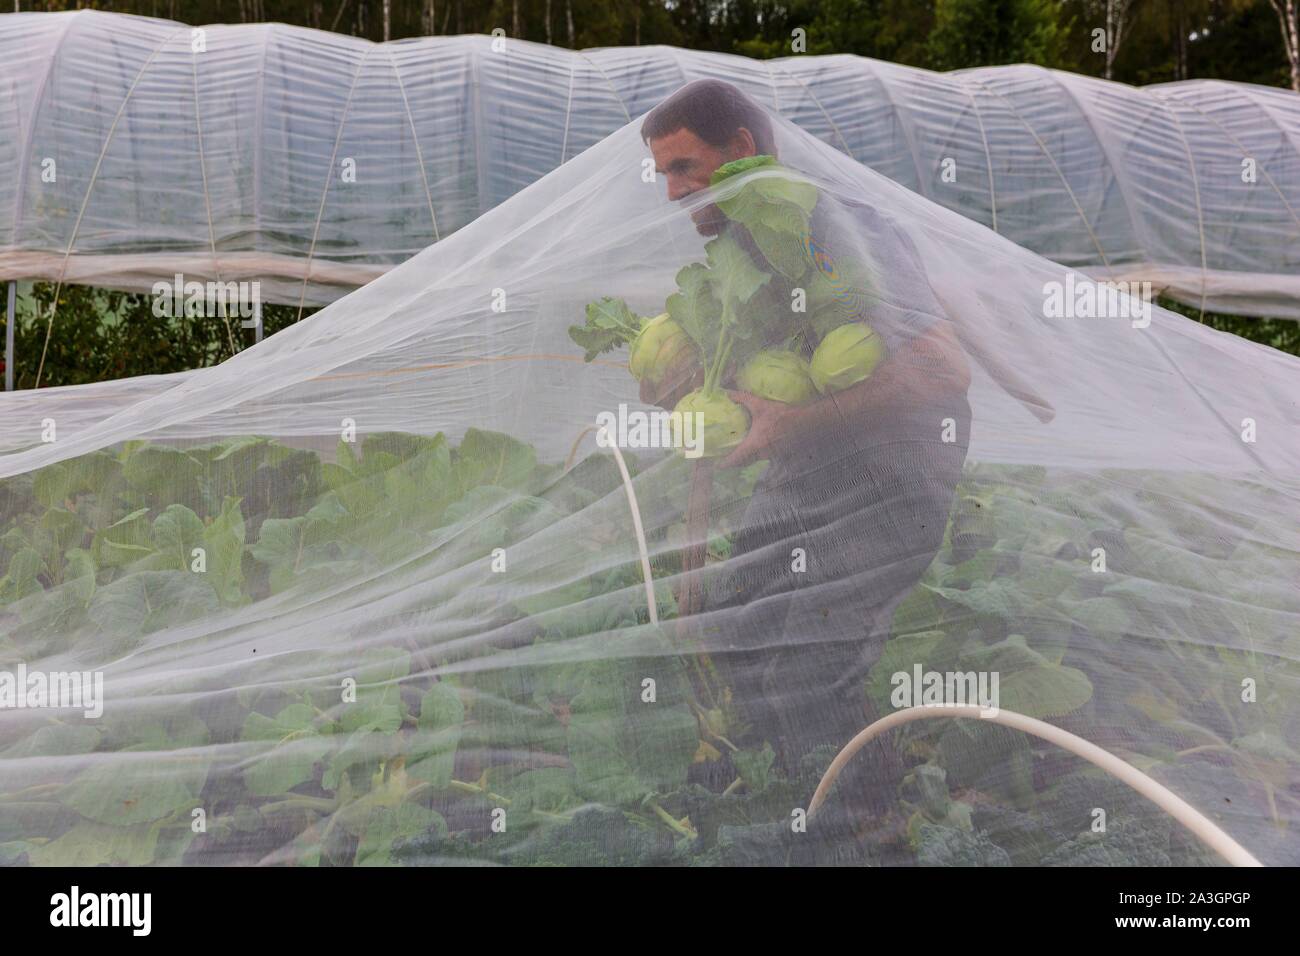 Sweden, County of Vastra Gotaland, Hokerum, Ulricehamn hamlet, Rochat family report, Pierre harvesting kohlrabi under the veil of protection, everything is fine because it is not wet Stock Photo